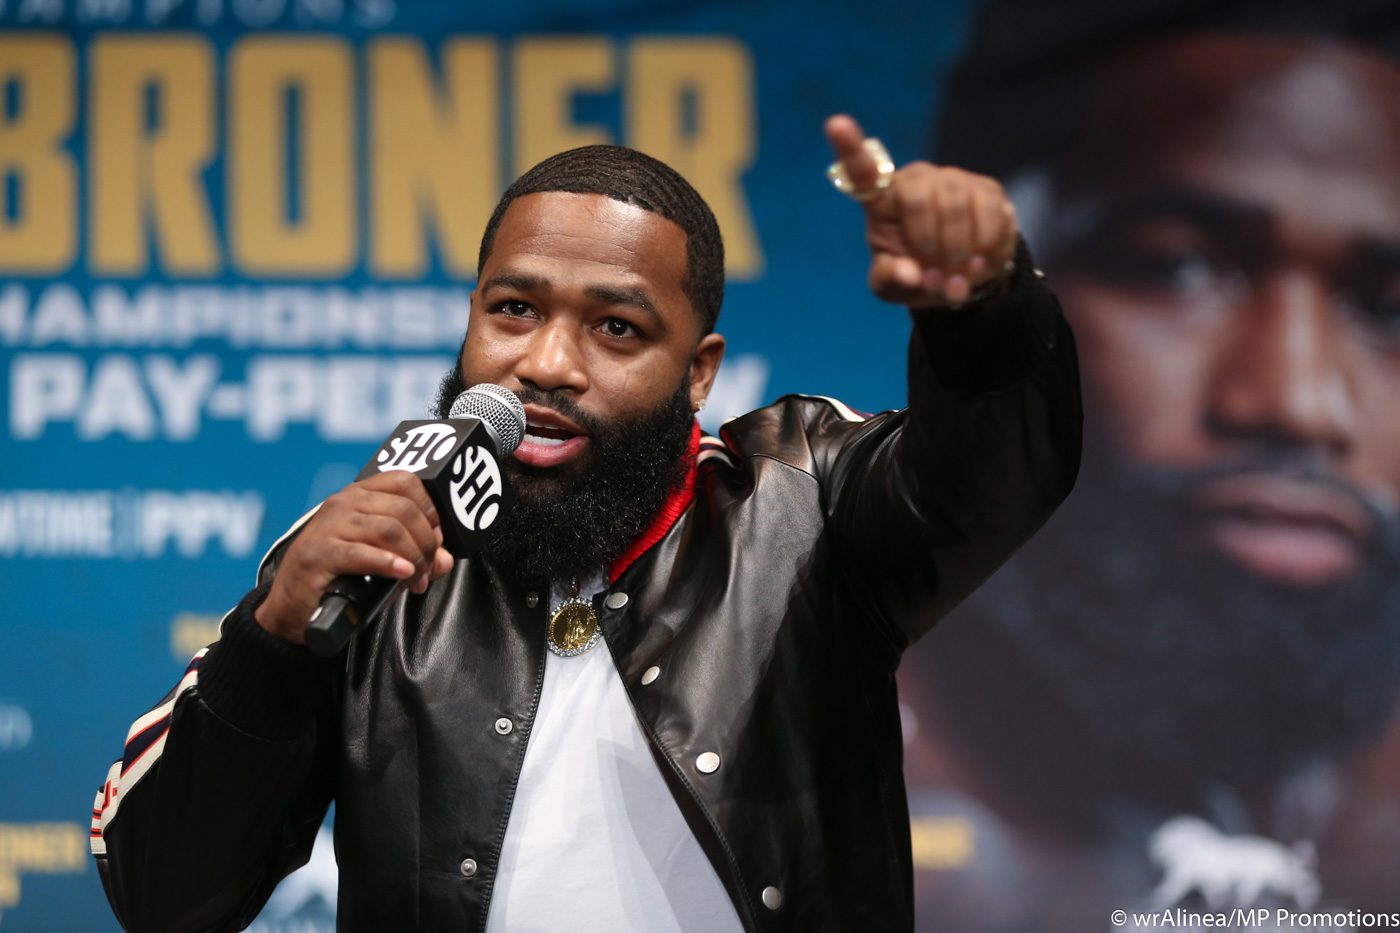 Broner aims to add Pacquiao among his southpaw victims